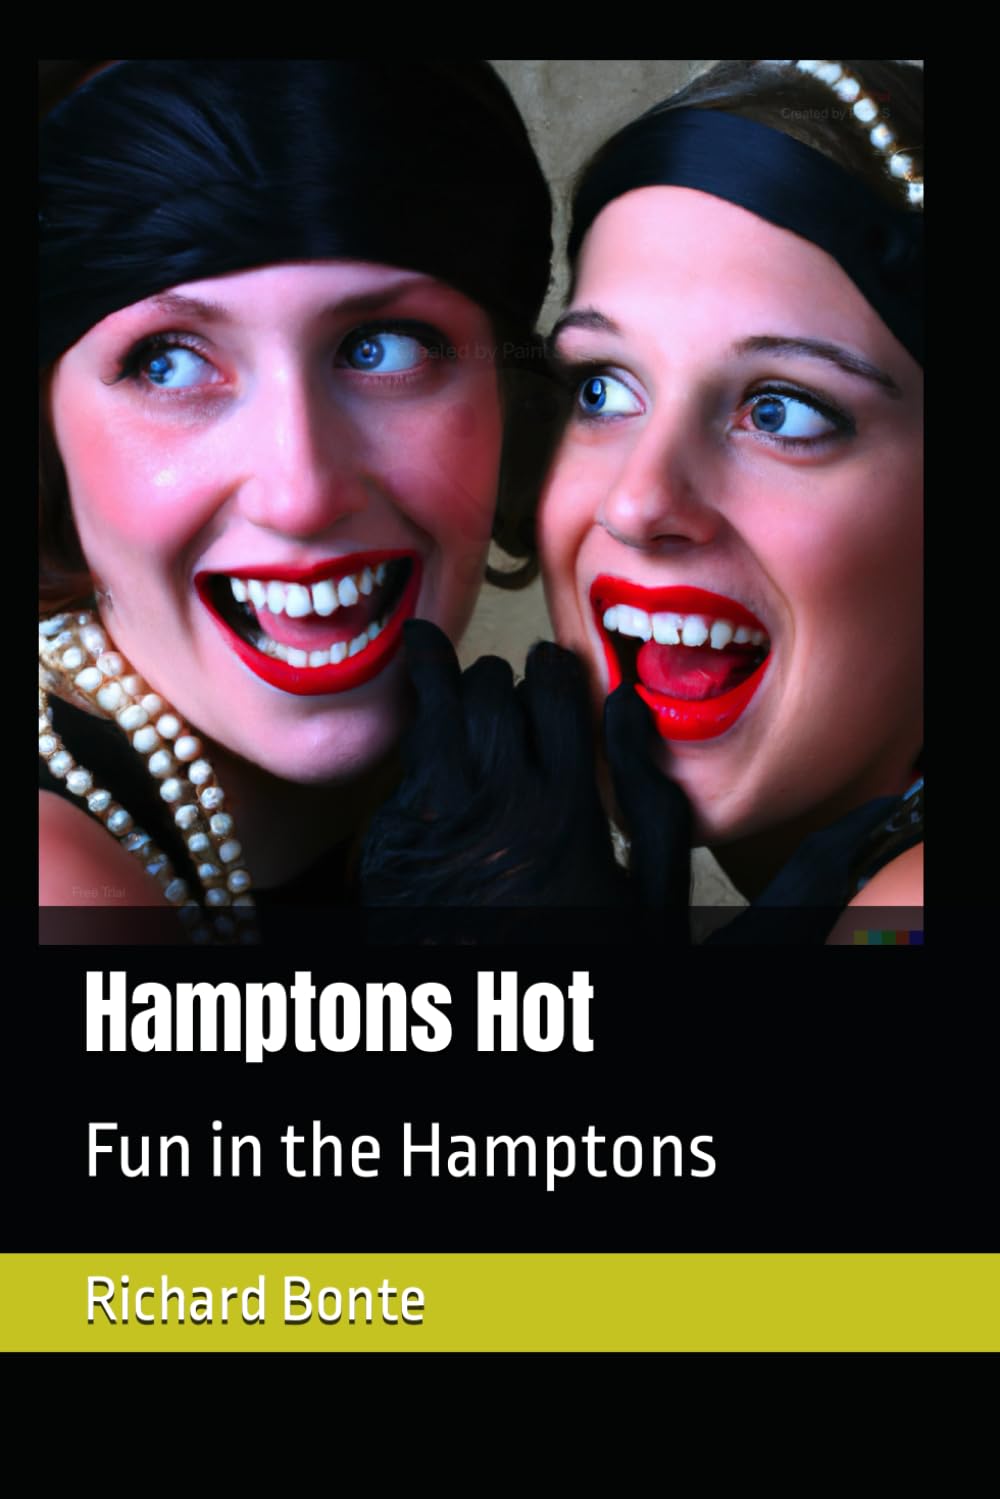 Hamptons Hot, by Richard Bonte, is the fourth book in The James Masters Series by Richard Bonte and Hamilton Harcourt Fleming III.